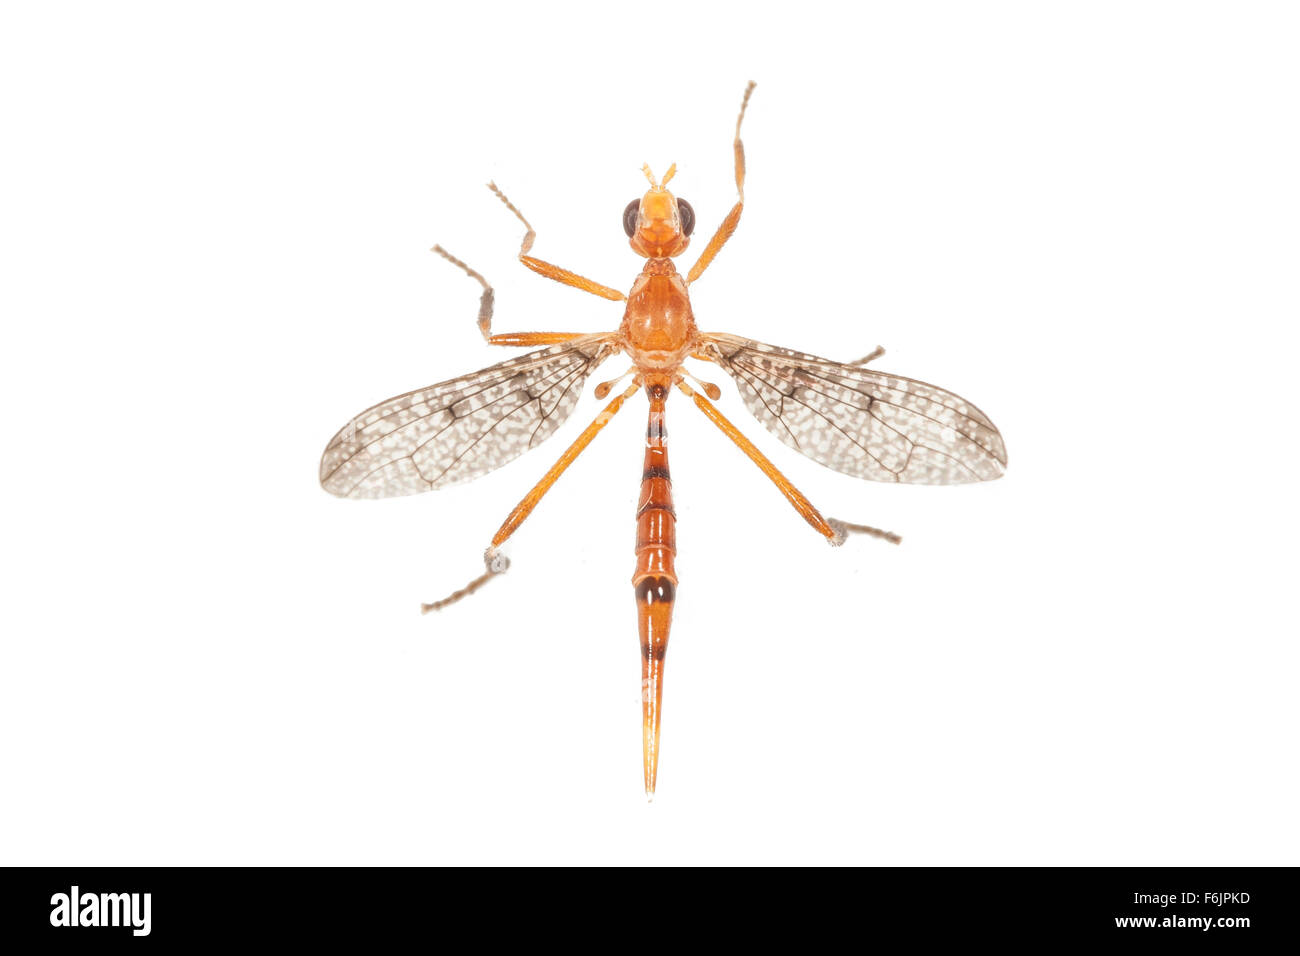 A slender fly (order Diptera) with characteristic halteres clearly visible. Photographed on a white background Stock Photo